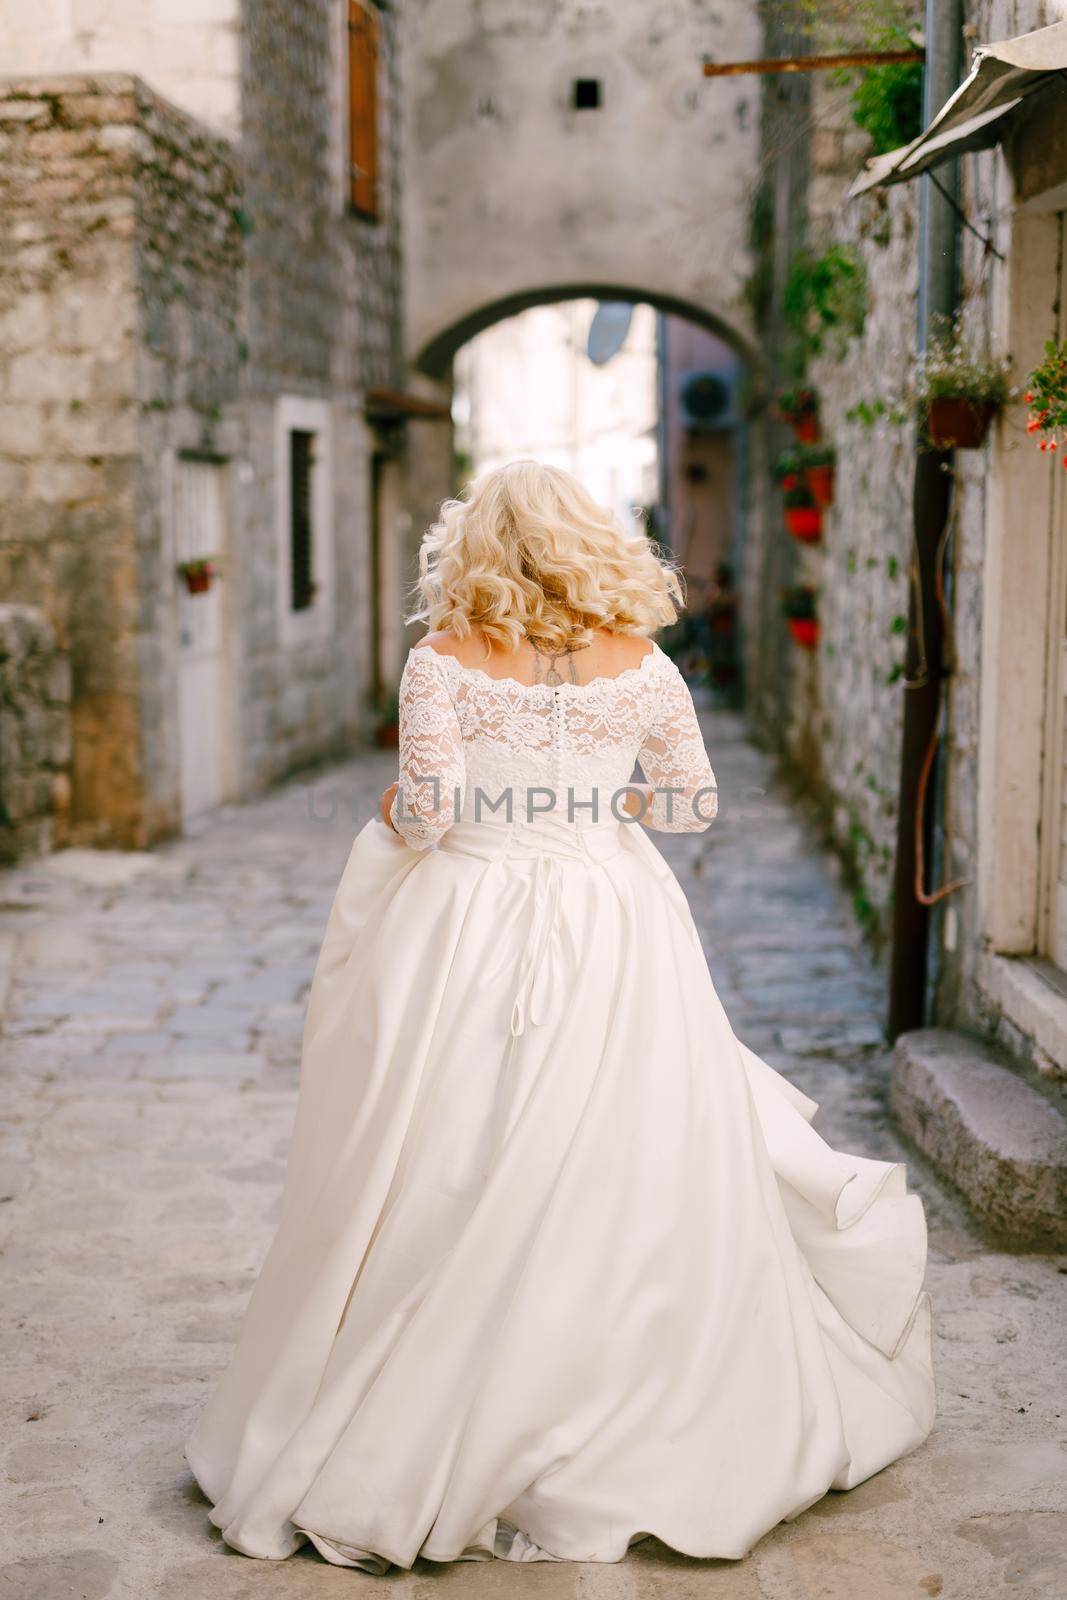 The bride walks along a beautiful narrow street of the old town of Perast with brick houses, back view . High quality photo